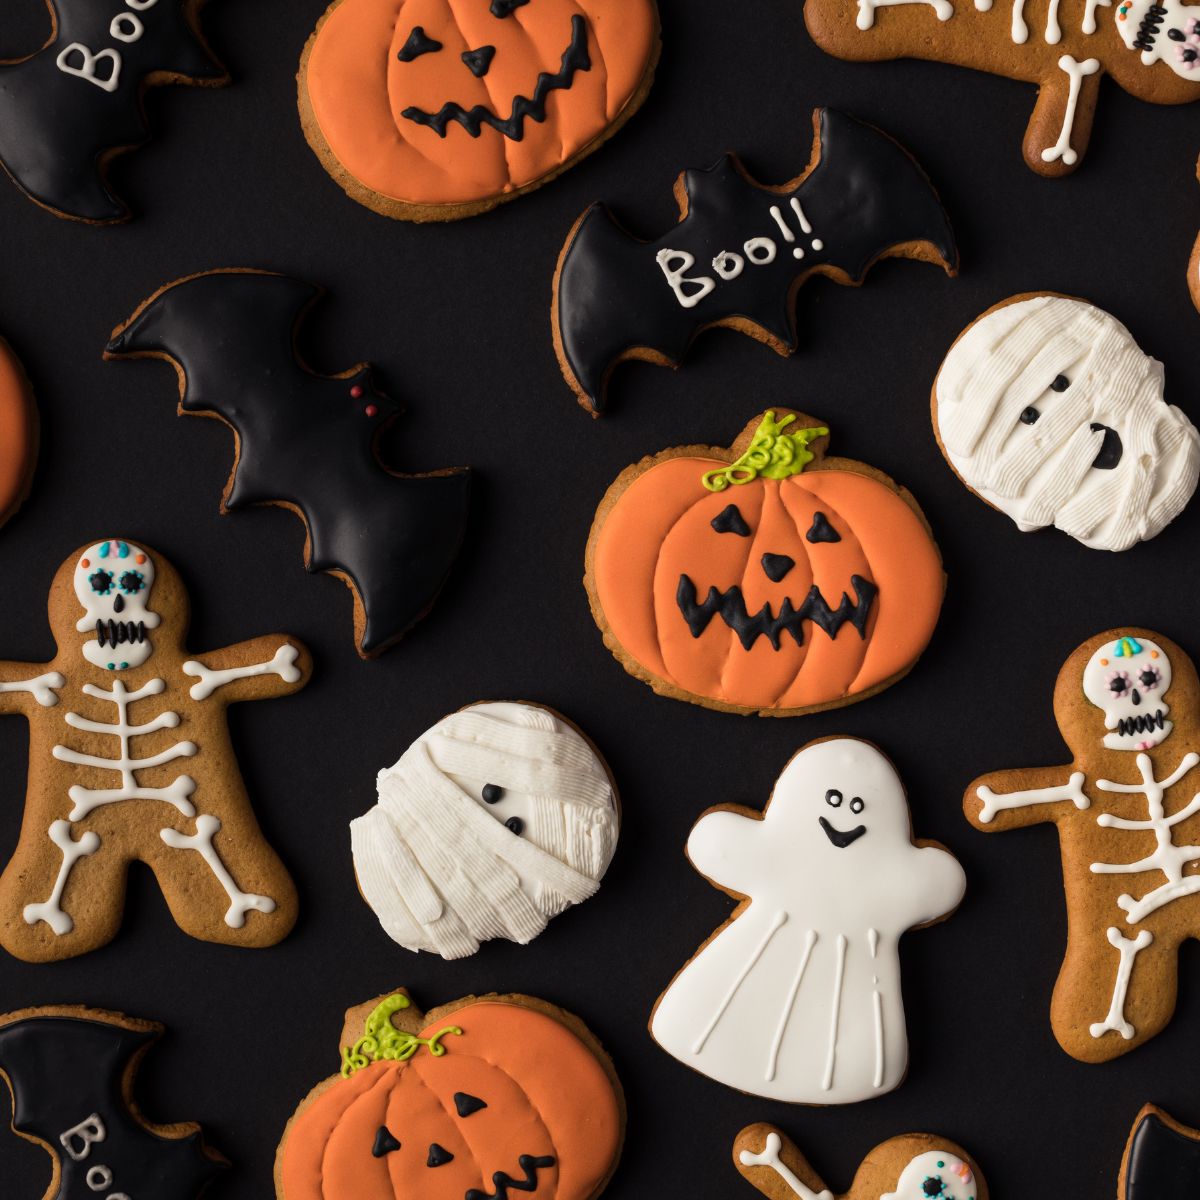 Halloween frosted cookies on black background. Ghosts, pumpkins, skeletons and bats